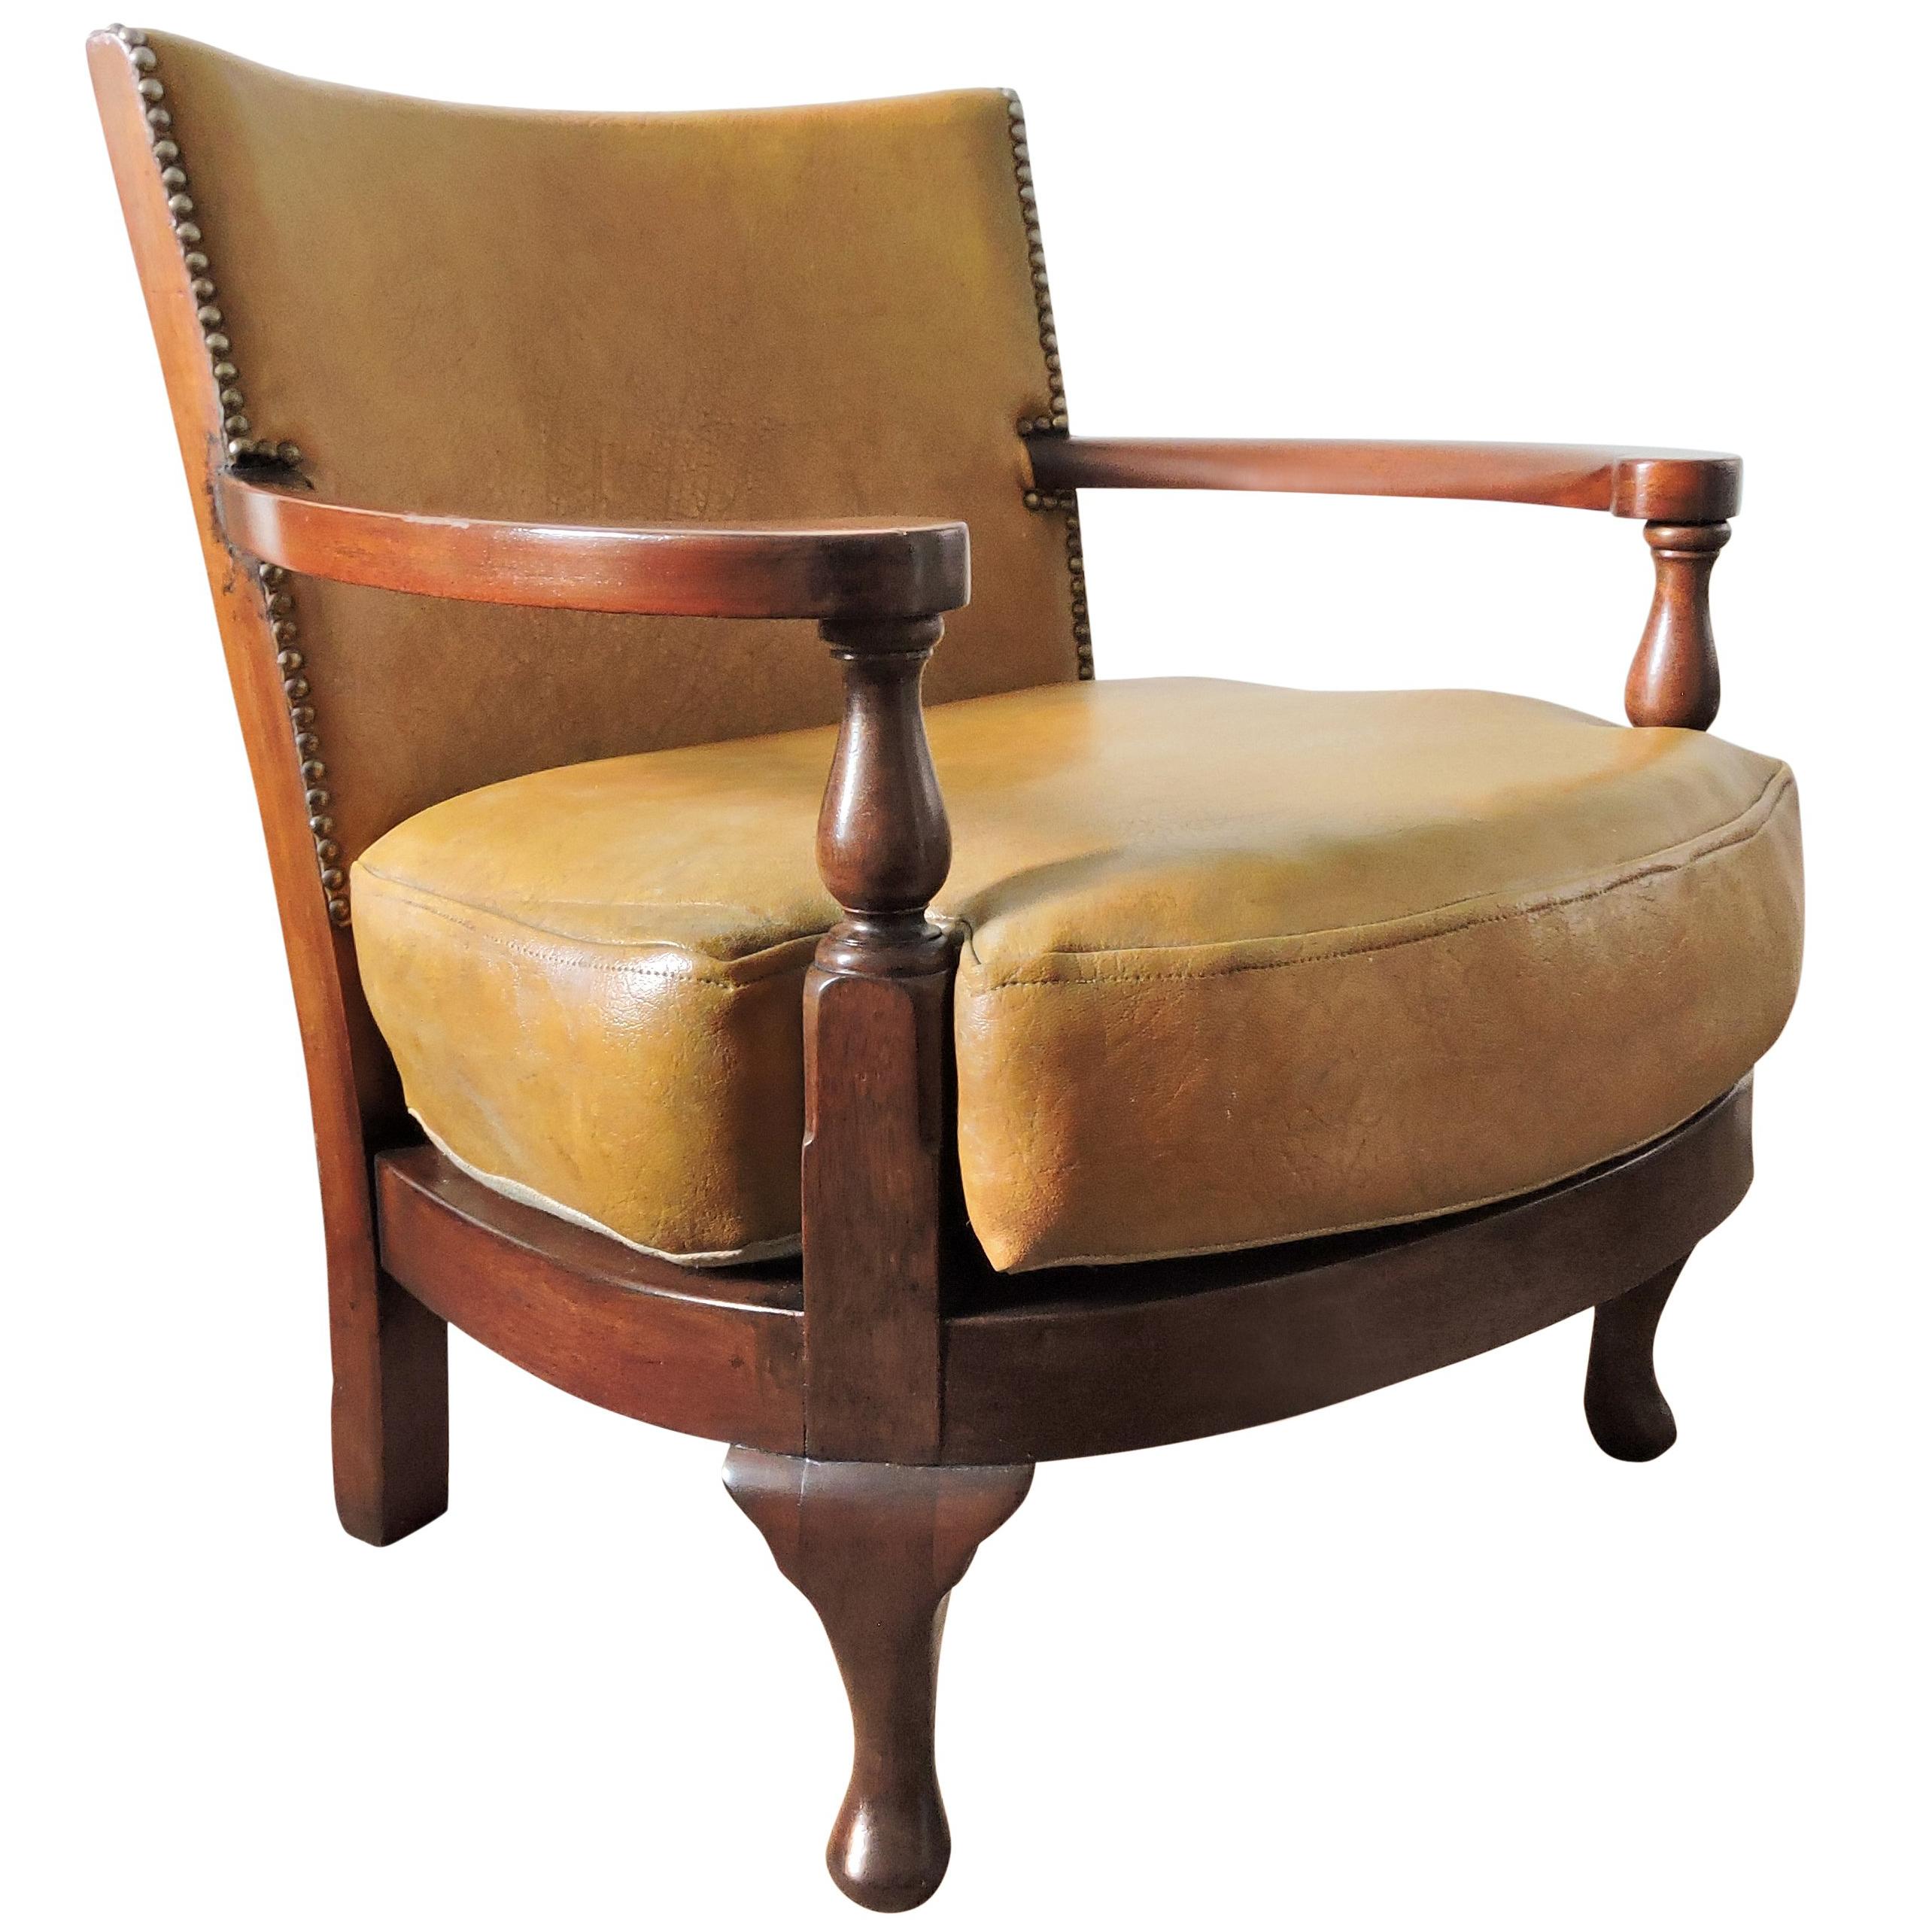 Vintage Mustard Yellow Leather and Wood Tub Chair For Sale